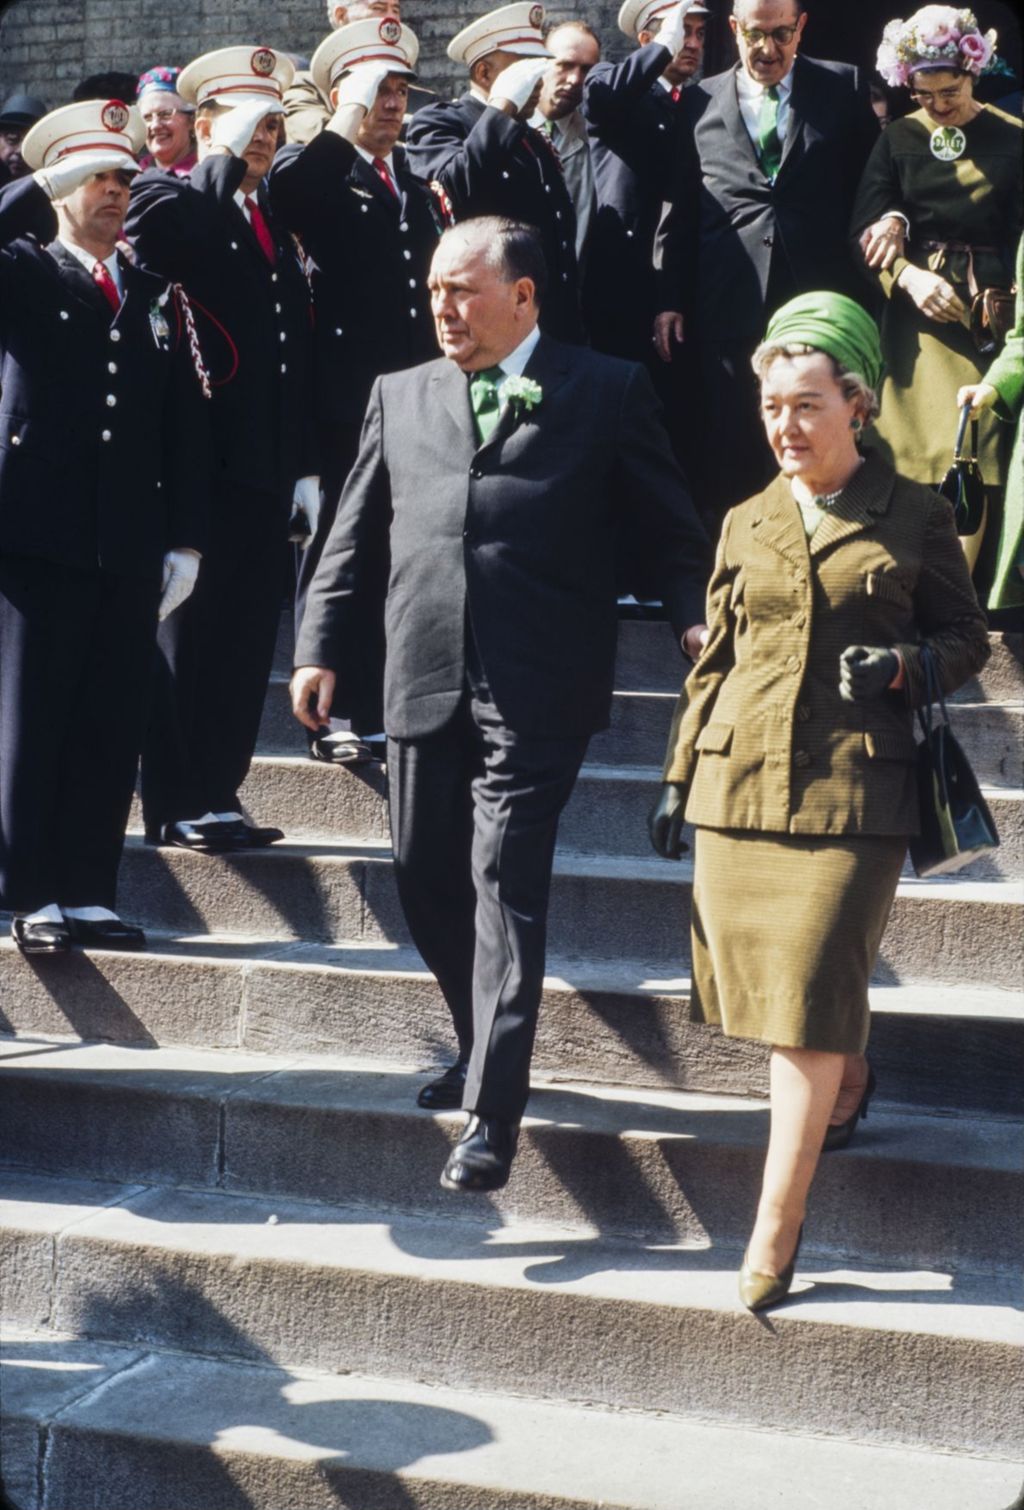 St. Patrick's Day in Chicago, 1966, Richard J. and Eleanor Daley leaving Old St. Patrick's Church